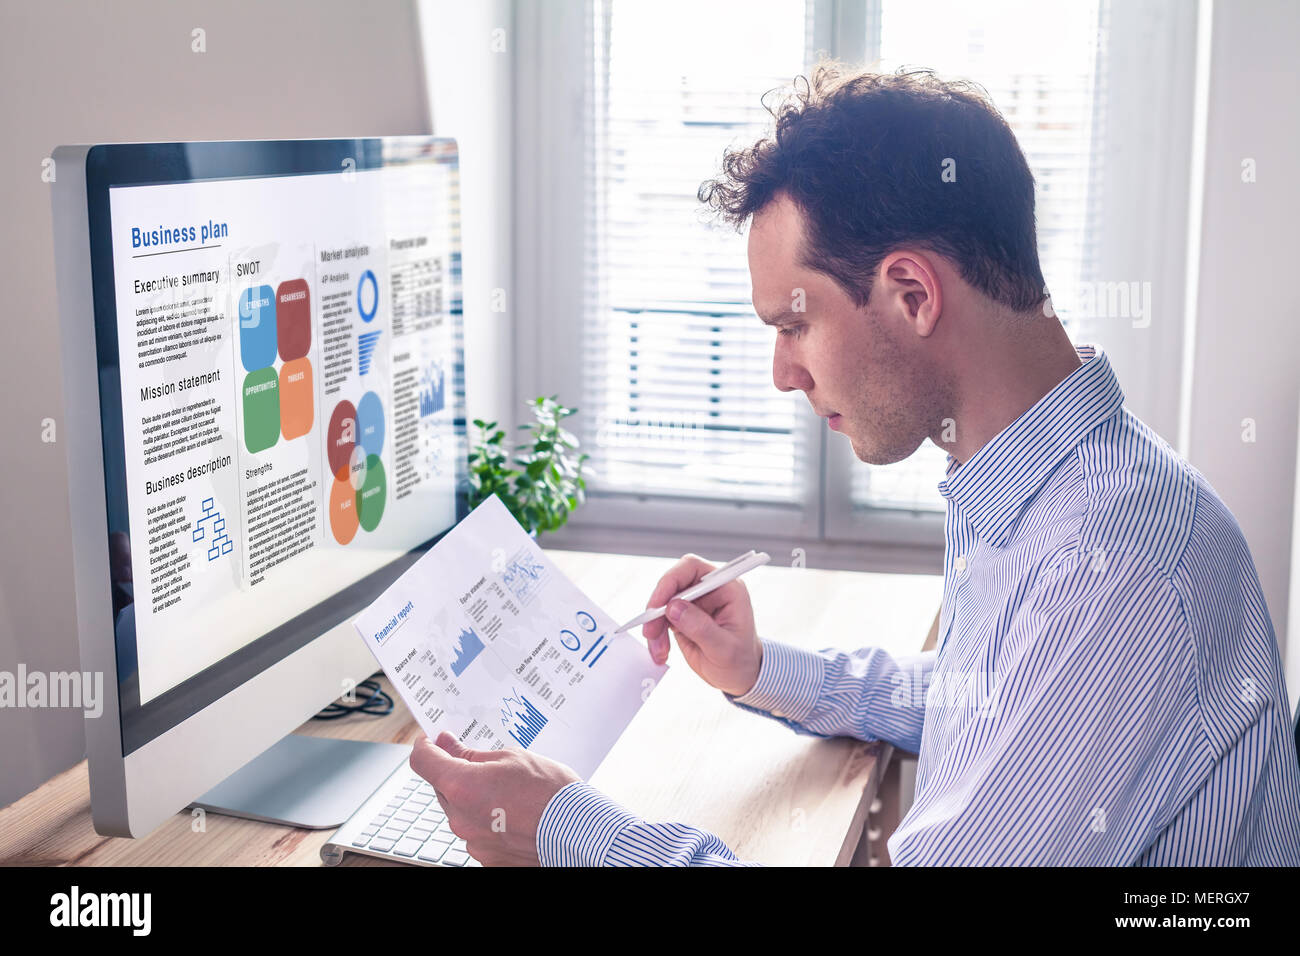 Businessman working on a business plan on computer screen in office with executive summary, mission statement, SWOT, market analysis, and financial re Stock Photo